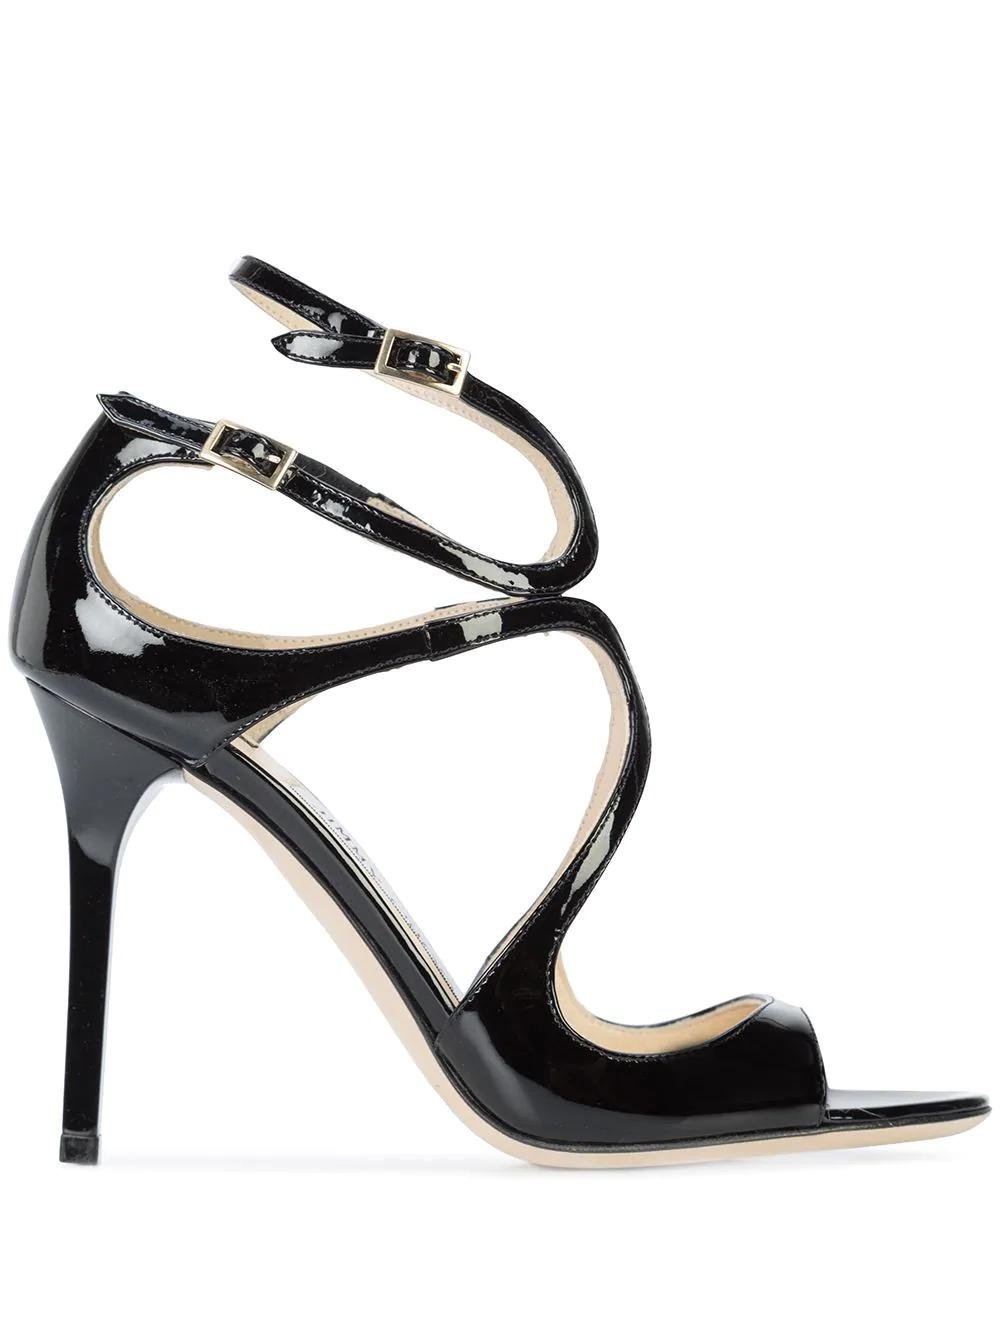 Lang sandals by JIMMY CHOO | jellibeans